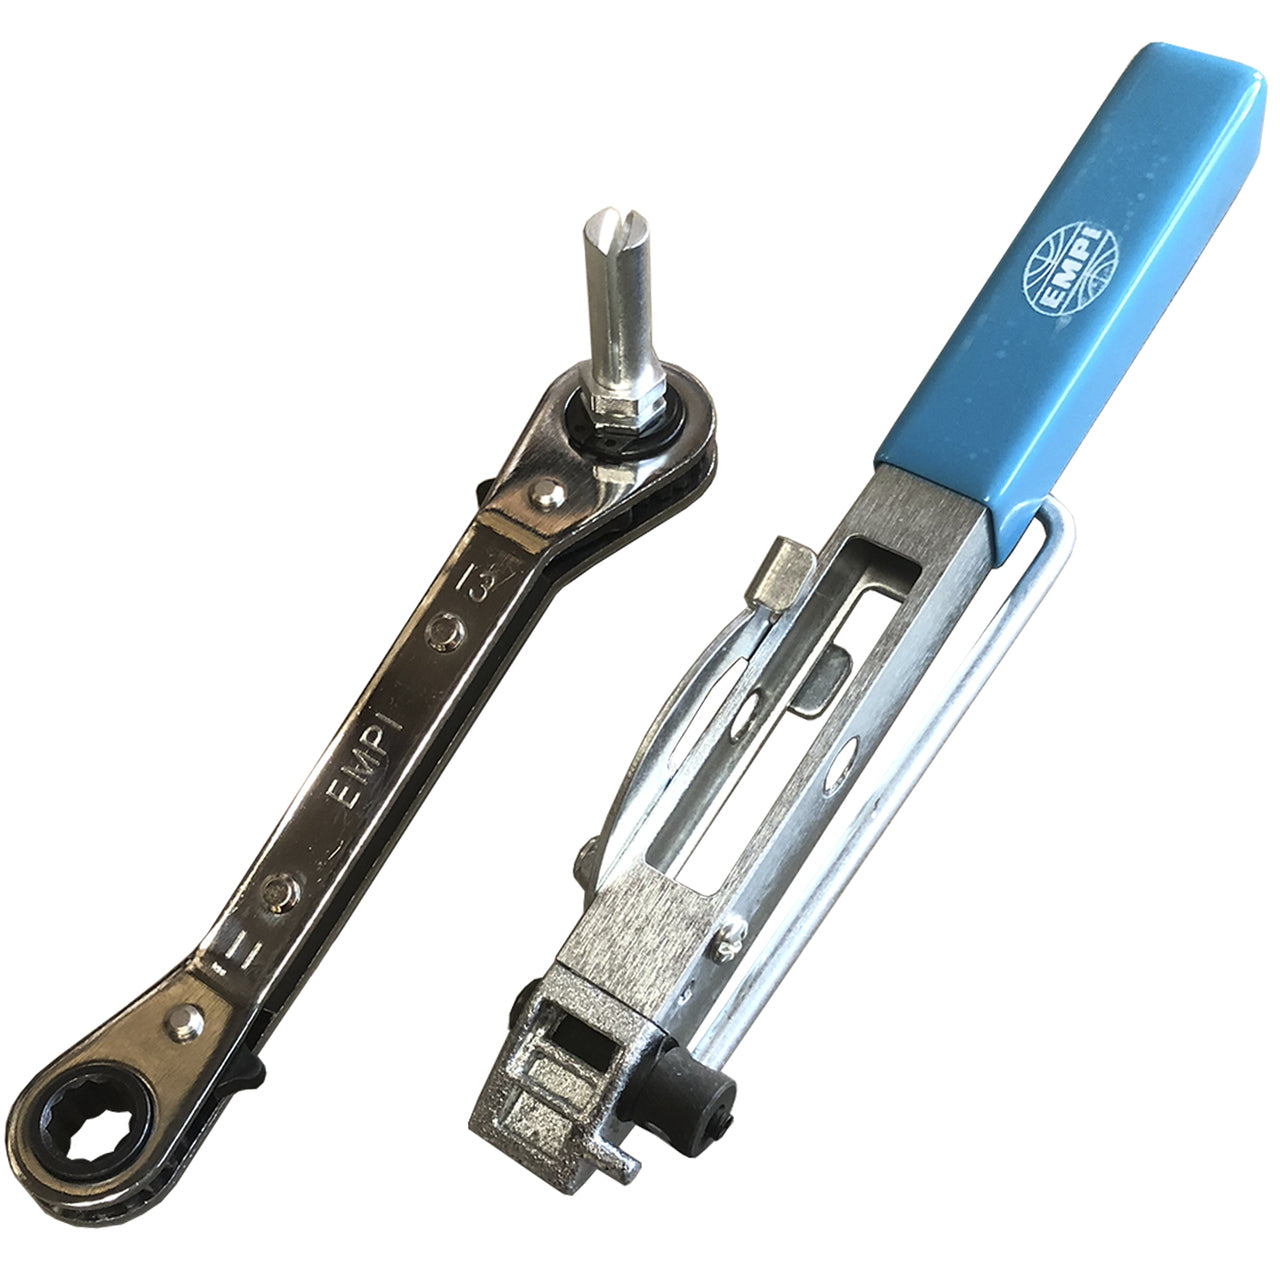 DELUXE CLAMP BANDING TOOL WITH RATCHET AND CUTTER